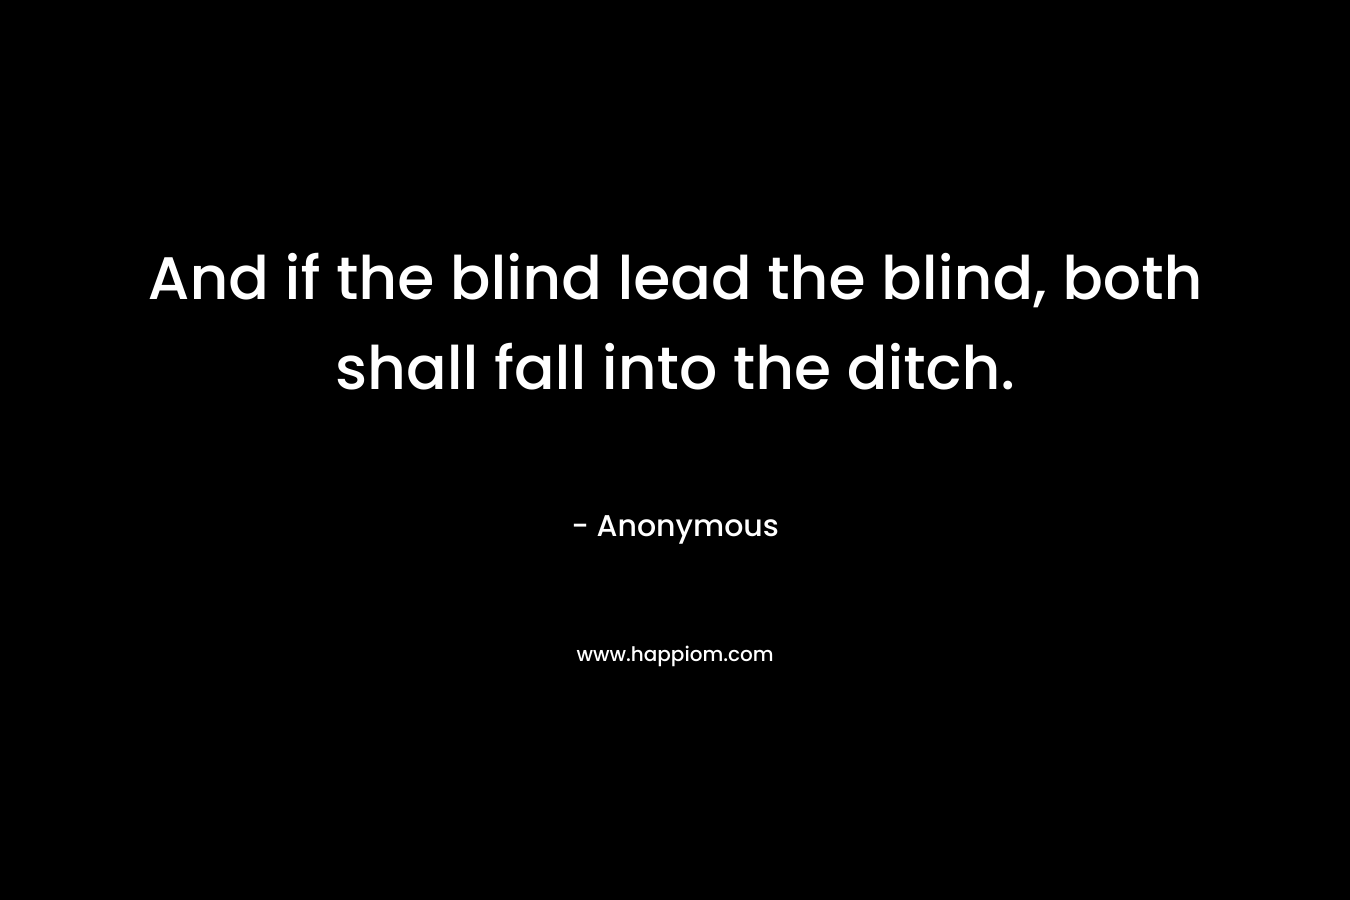 And if the blind lead the blind, both shall fall into the ditch.